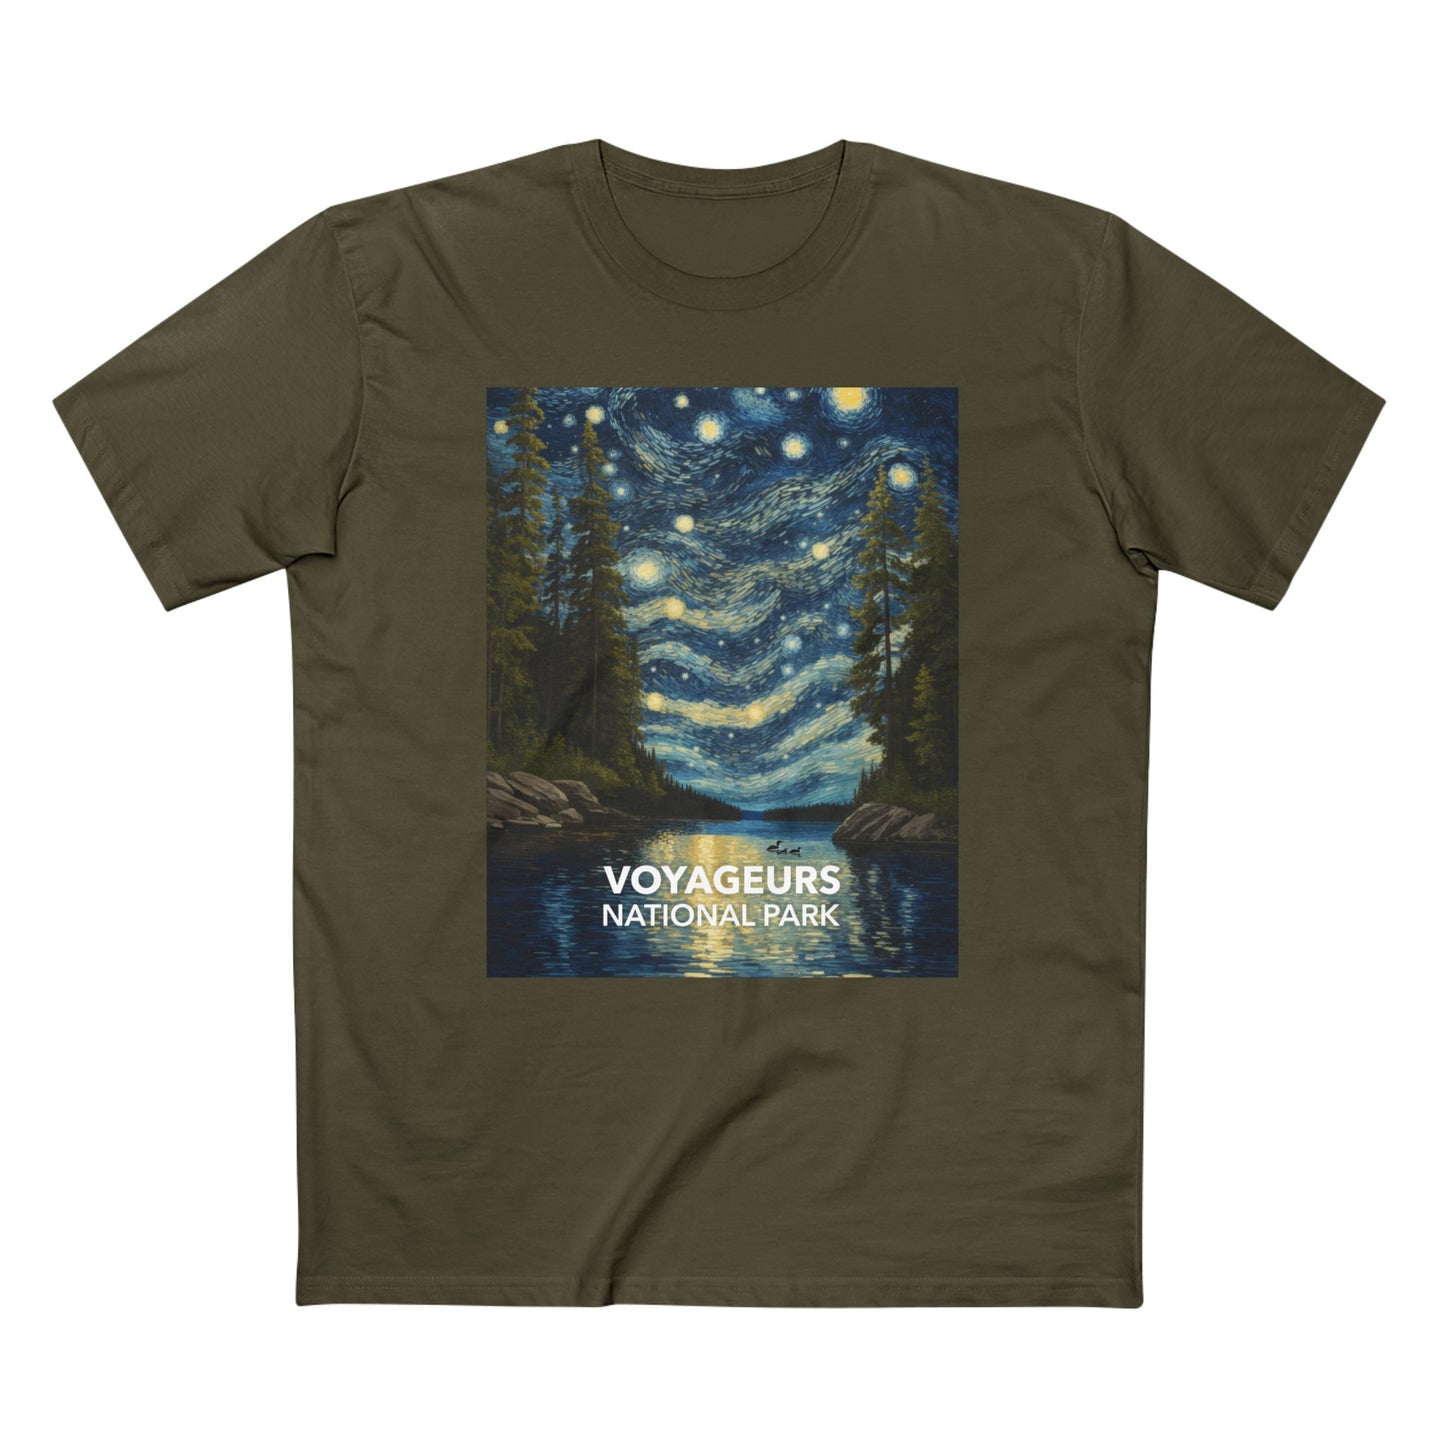 Voyageurs National Park T-Shirt - The Starry Night